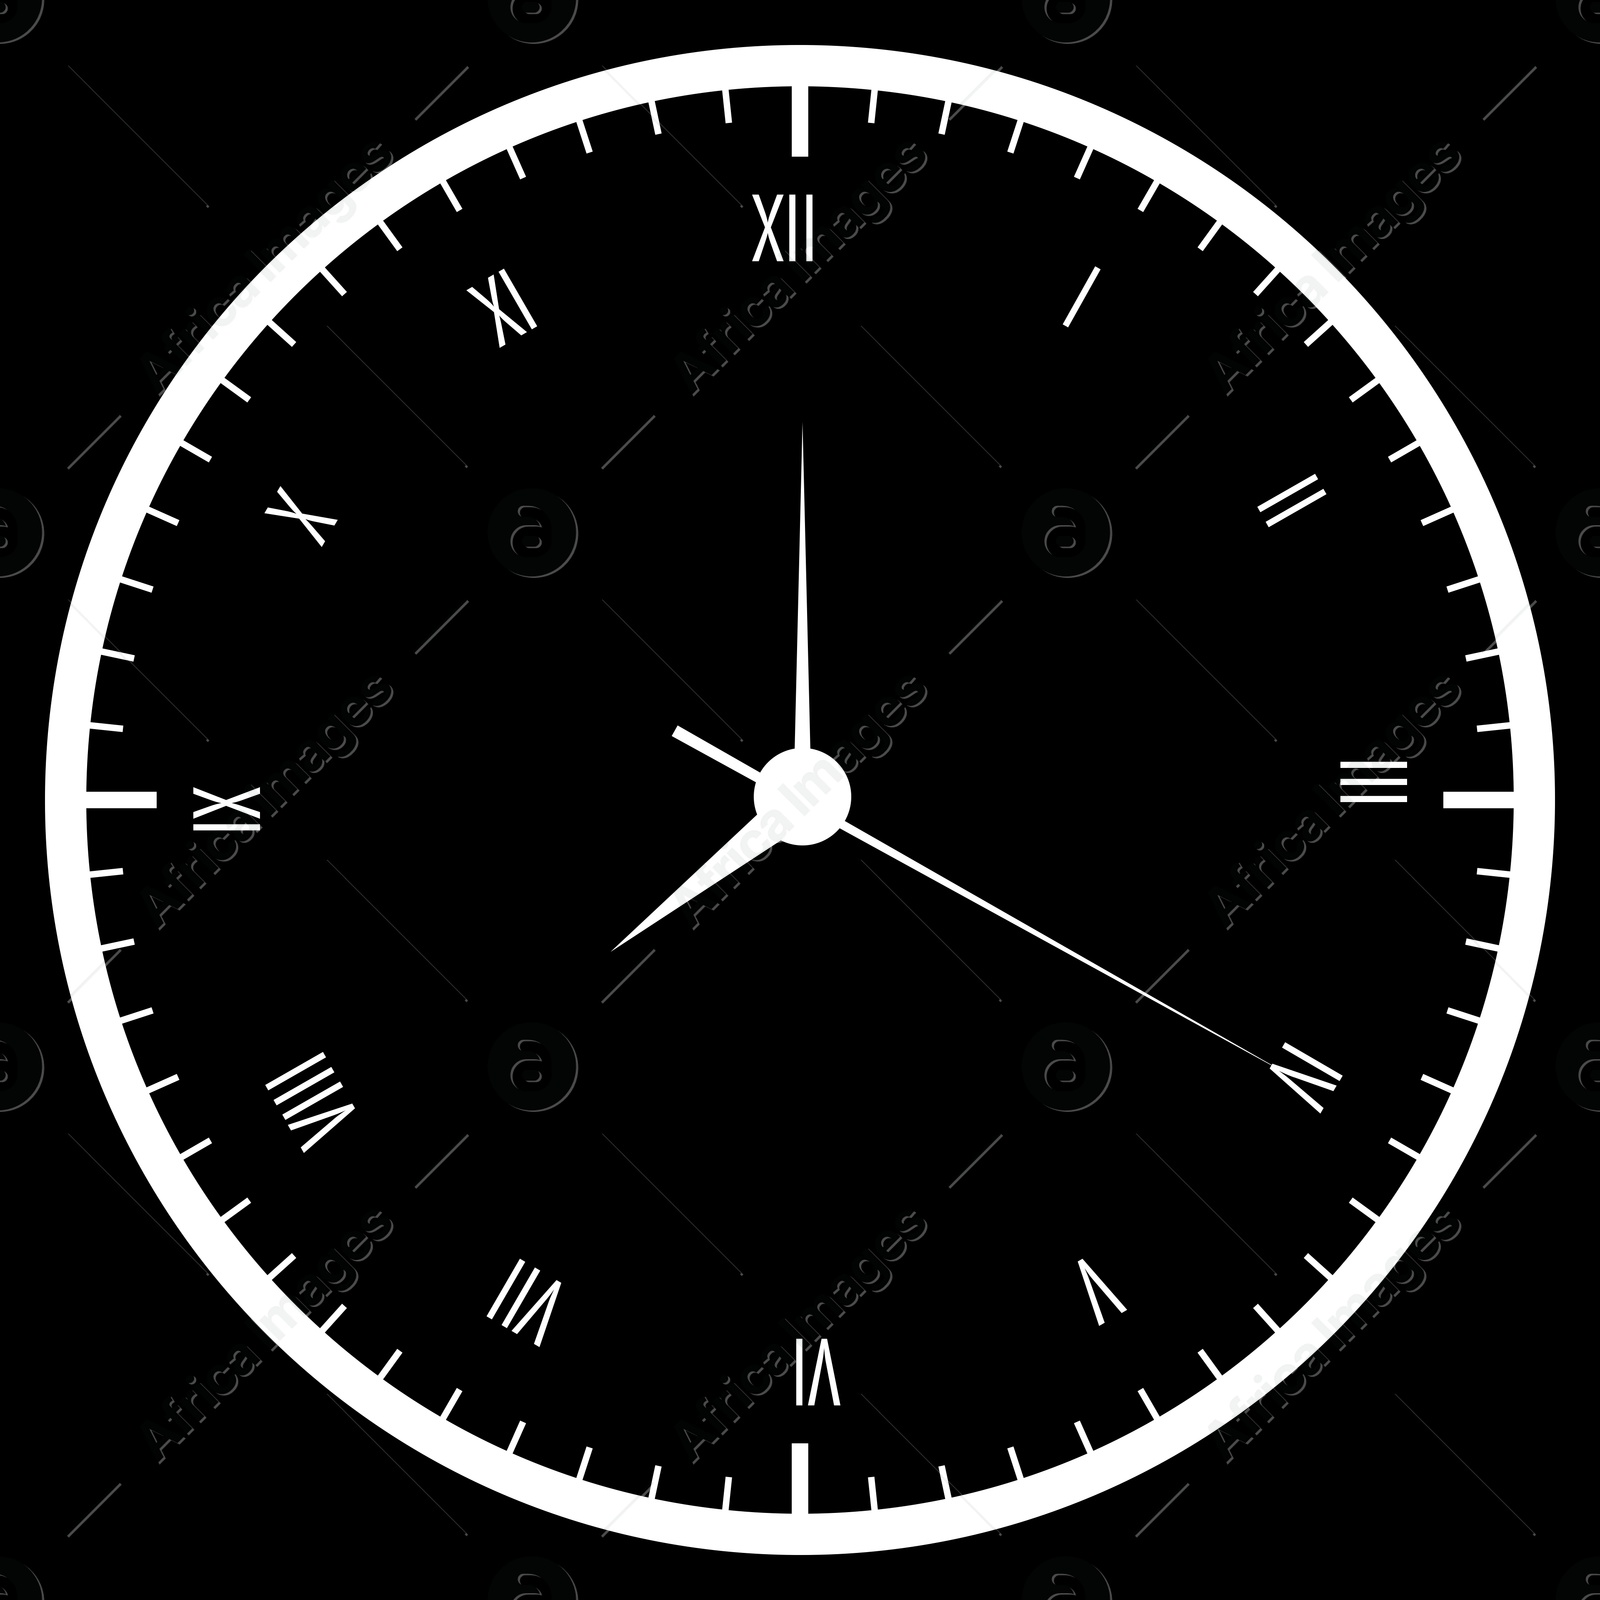 Image of Clock face with roman numerals on black background